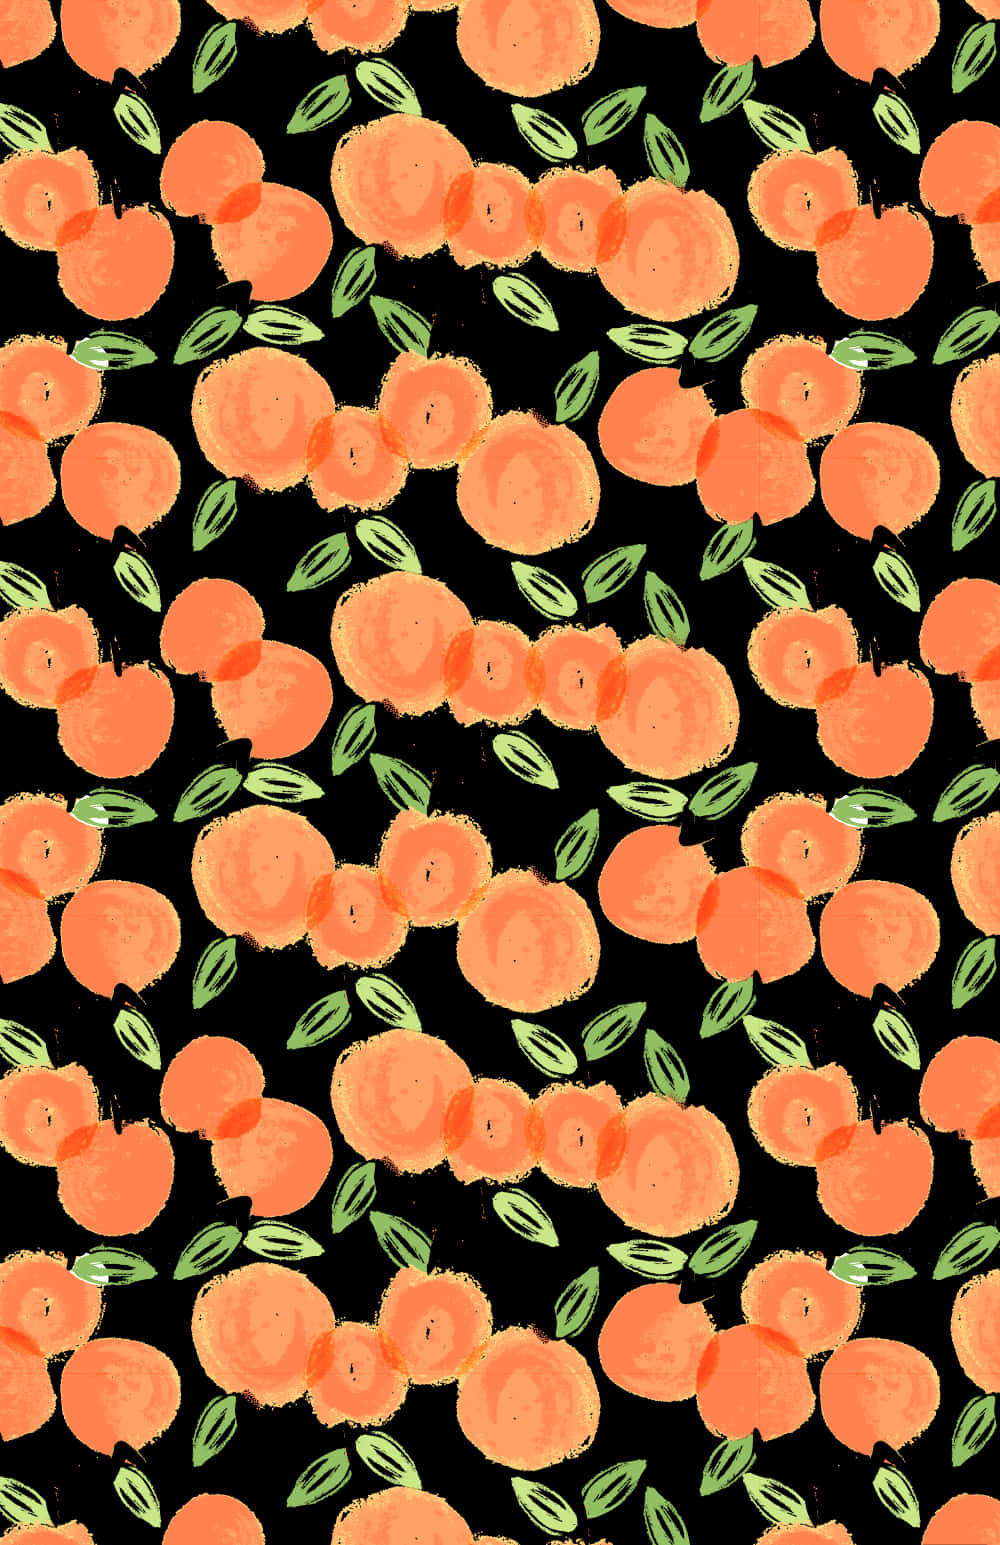 A Close-Up of a Bright and Colorful Orange Wallpaper